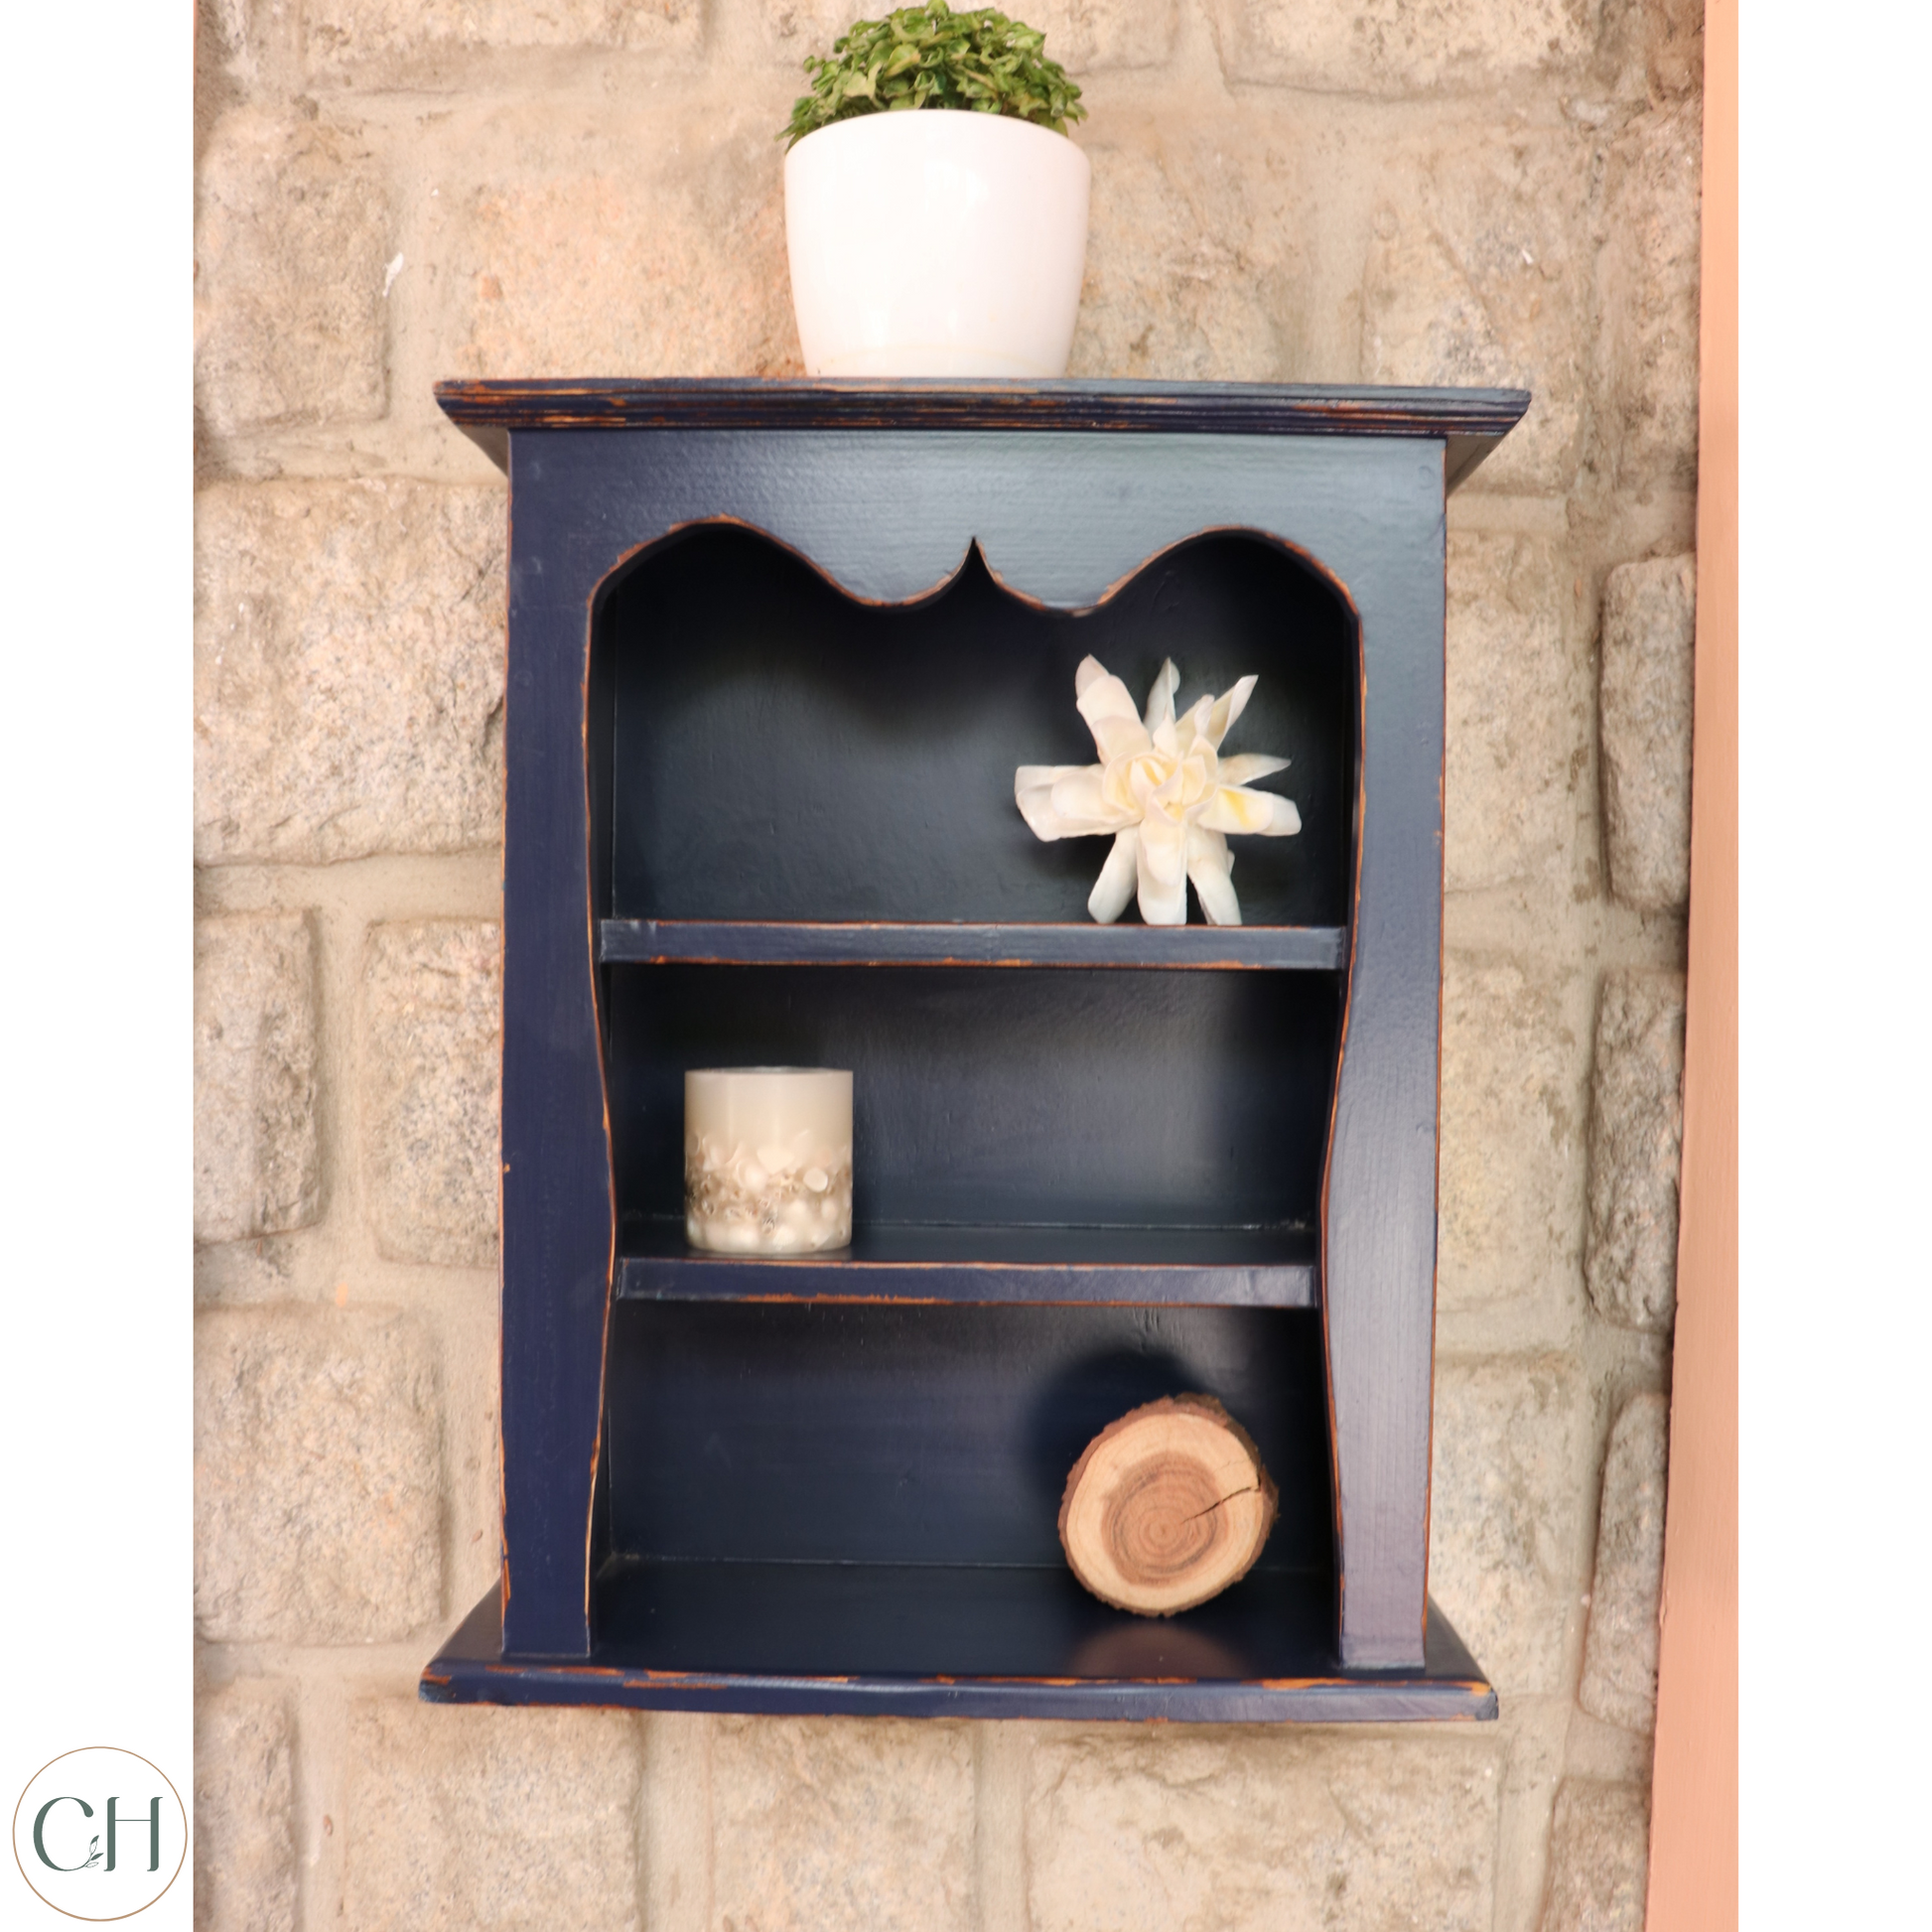 CustHum - country-style wall-mounted wooden shelf in distressed indigo painted finish